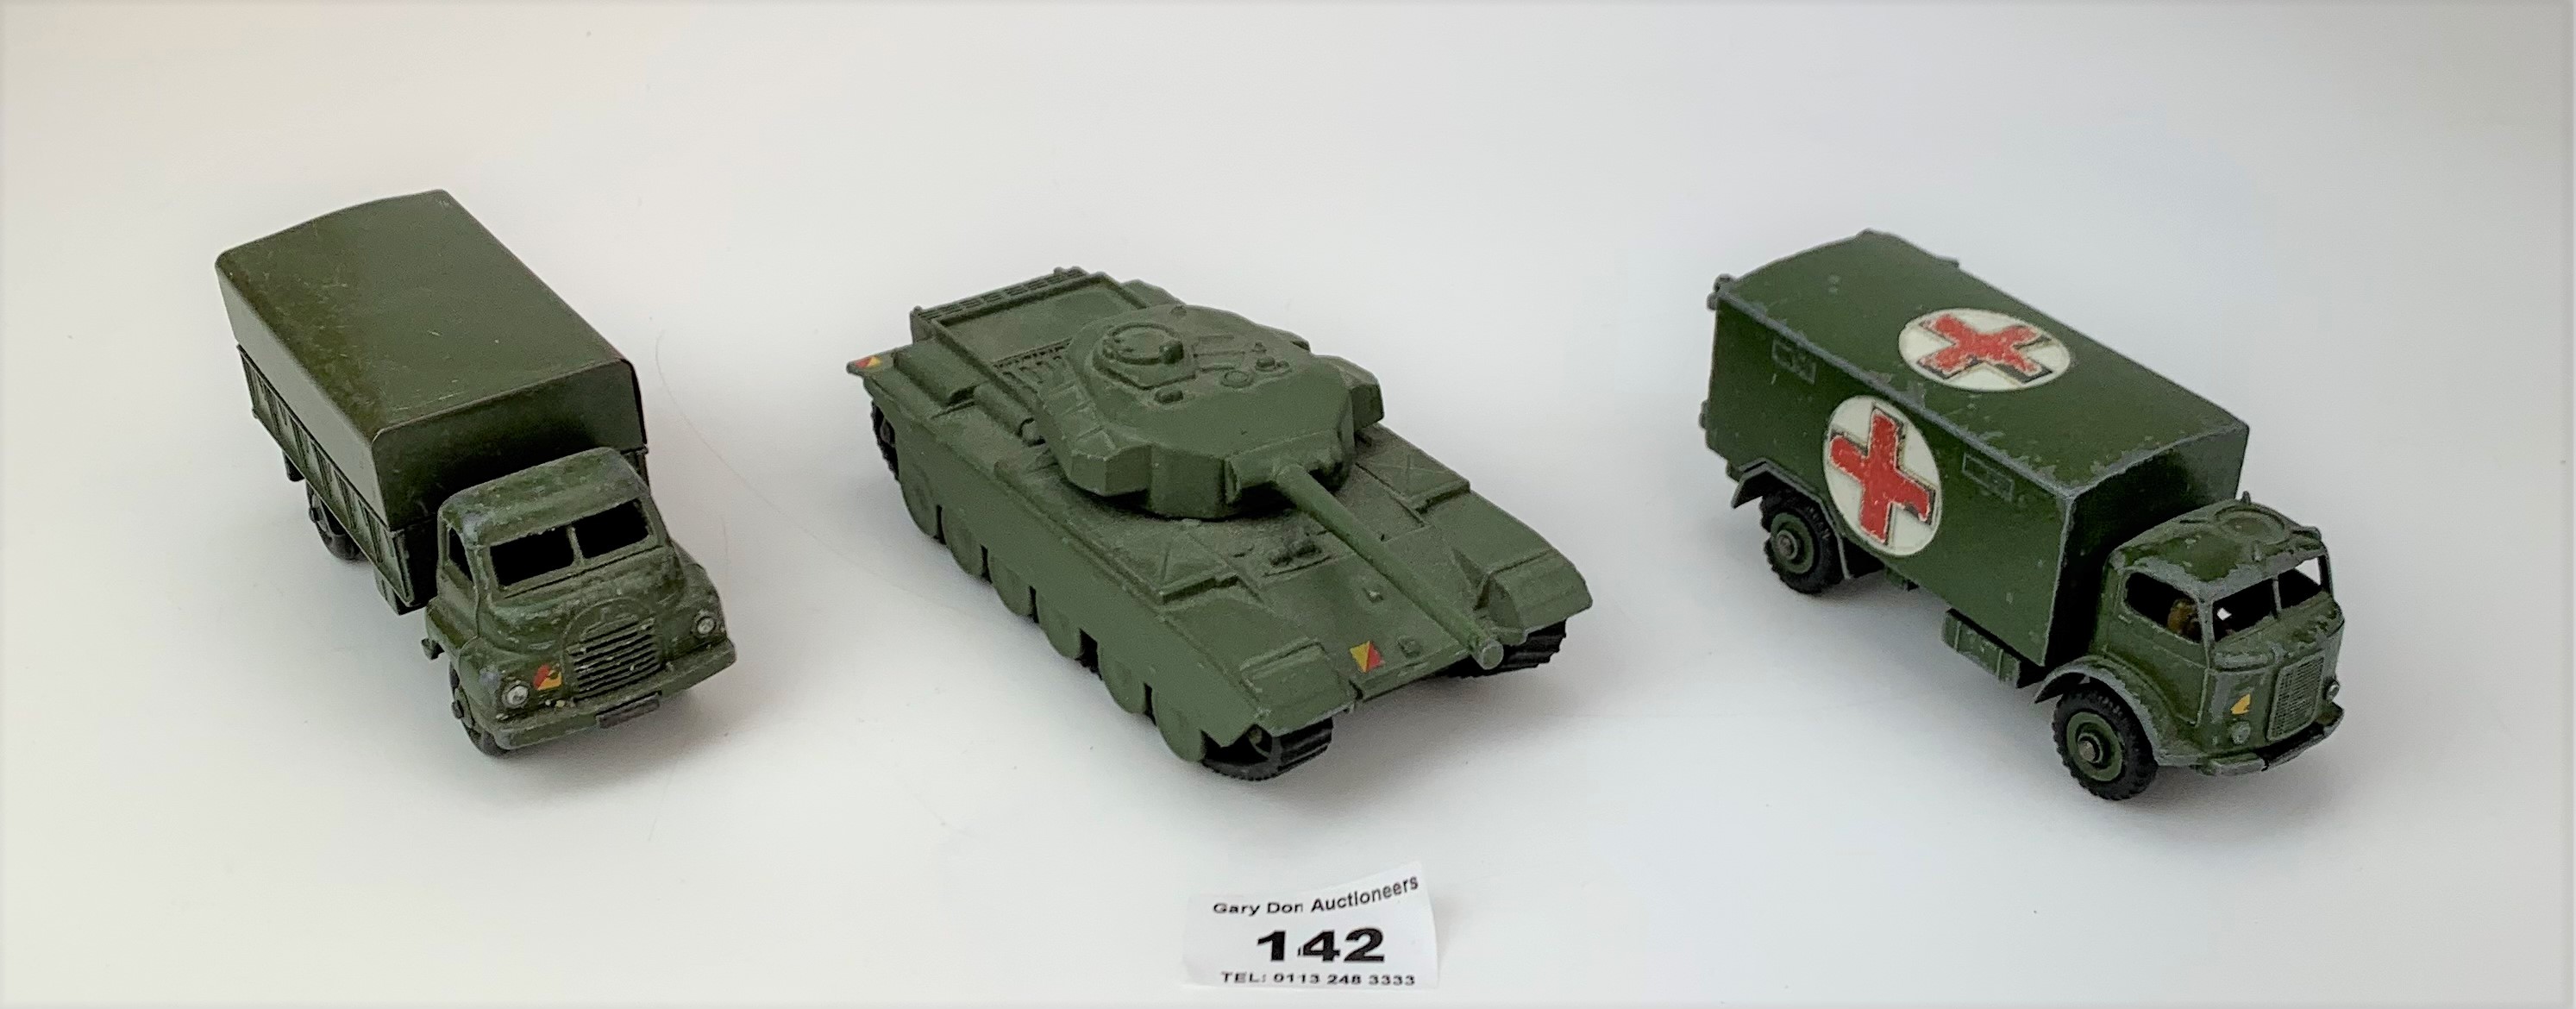 3 loose Dinky military vehicles